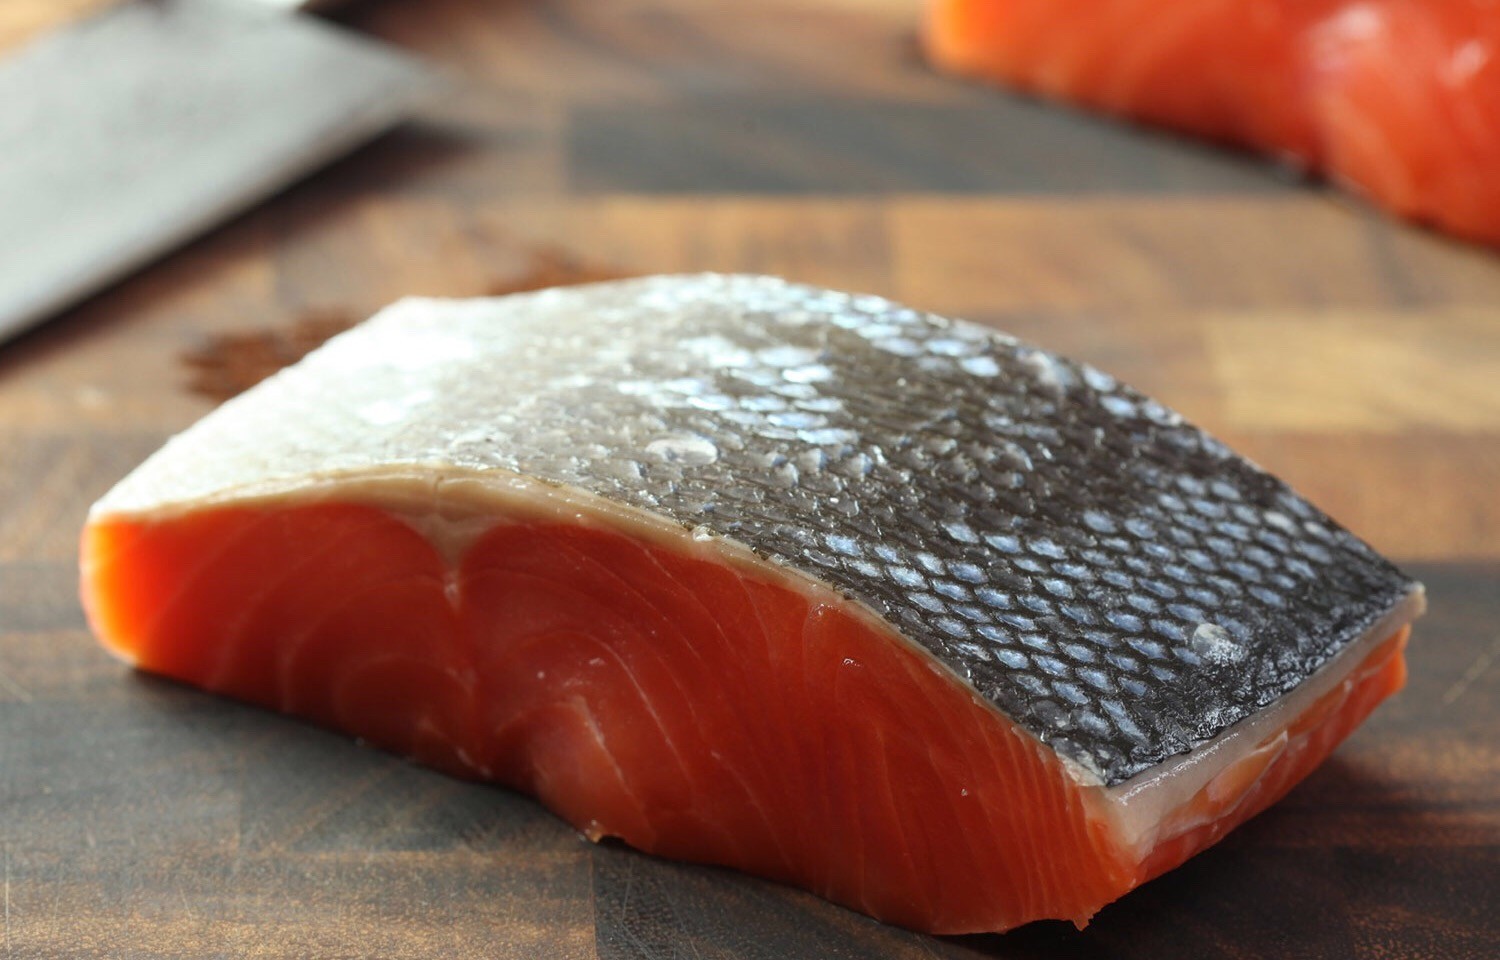  Salmon fillet with skin